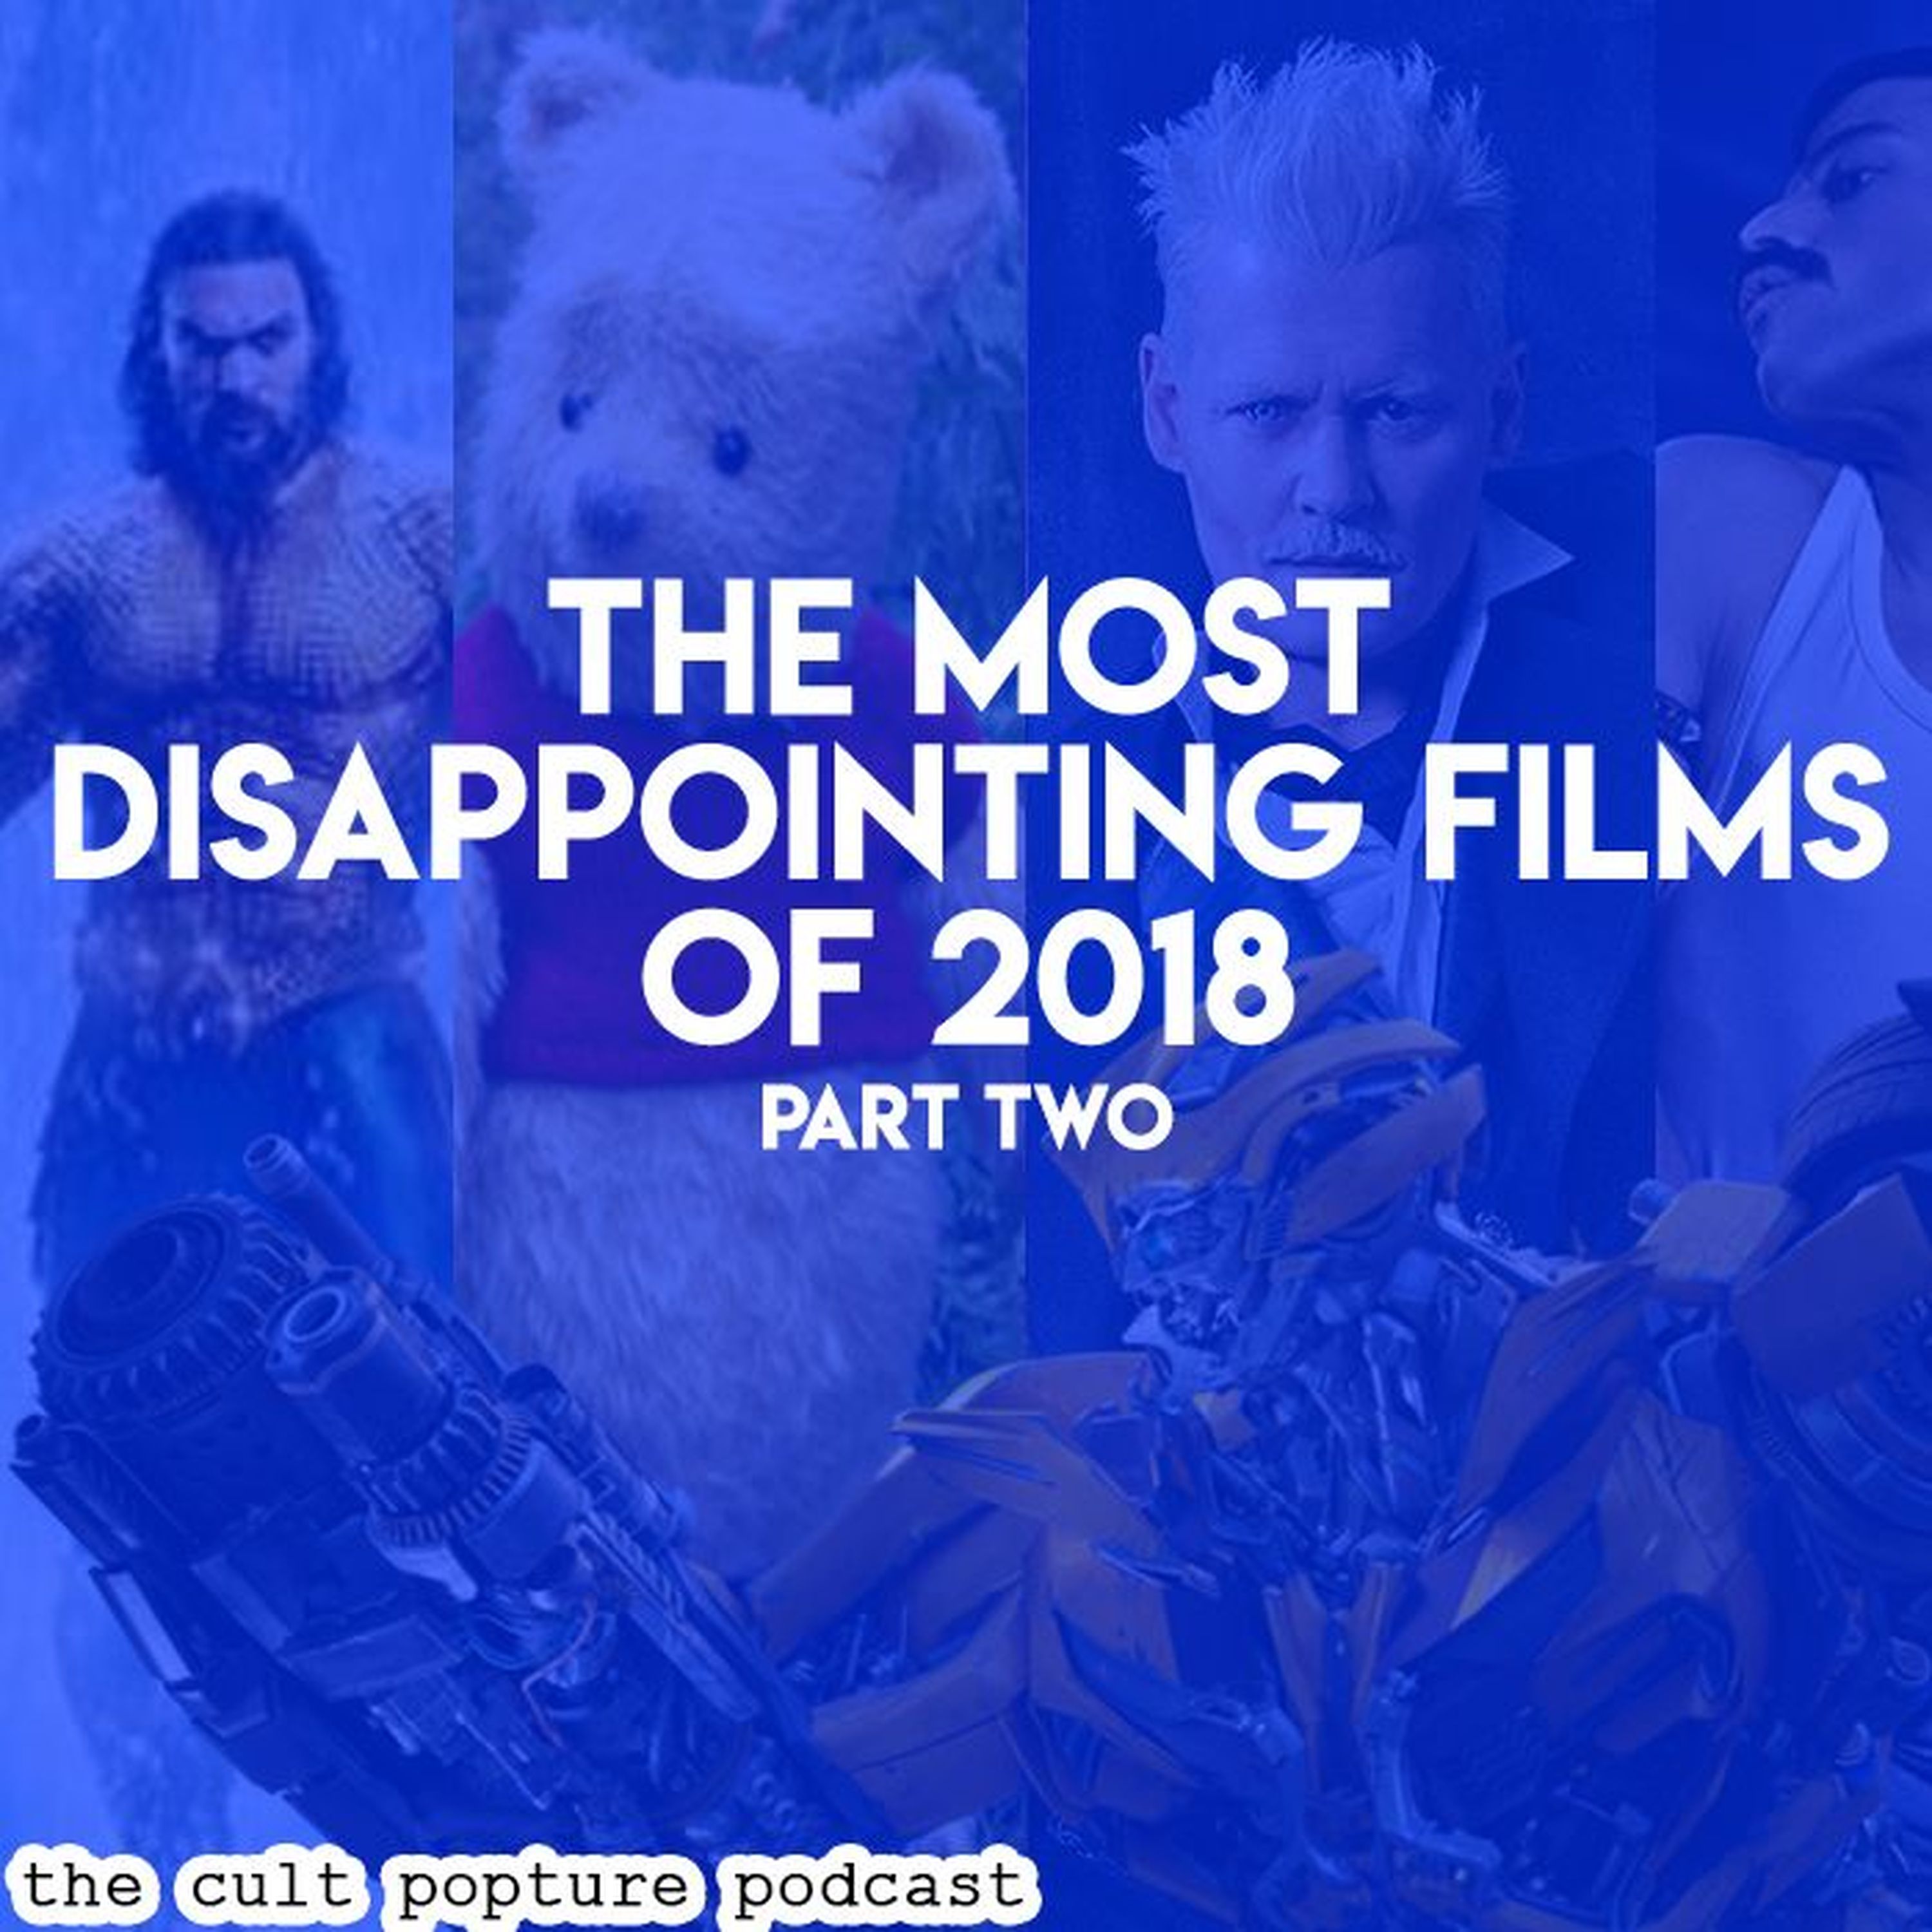 The Most Disappointing Films of 2018 (Part Two) | The Cult Popture Podcast